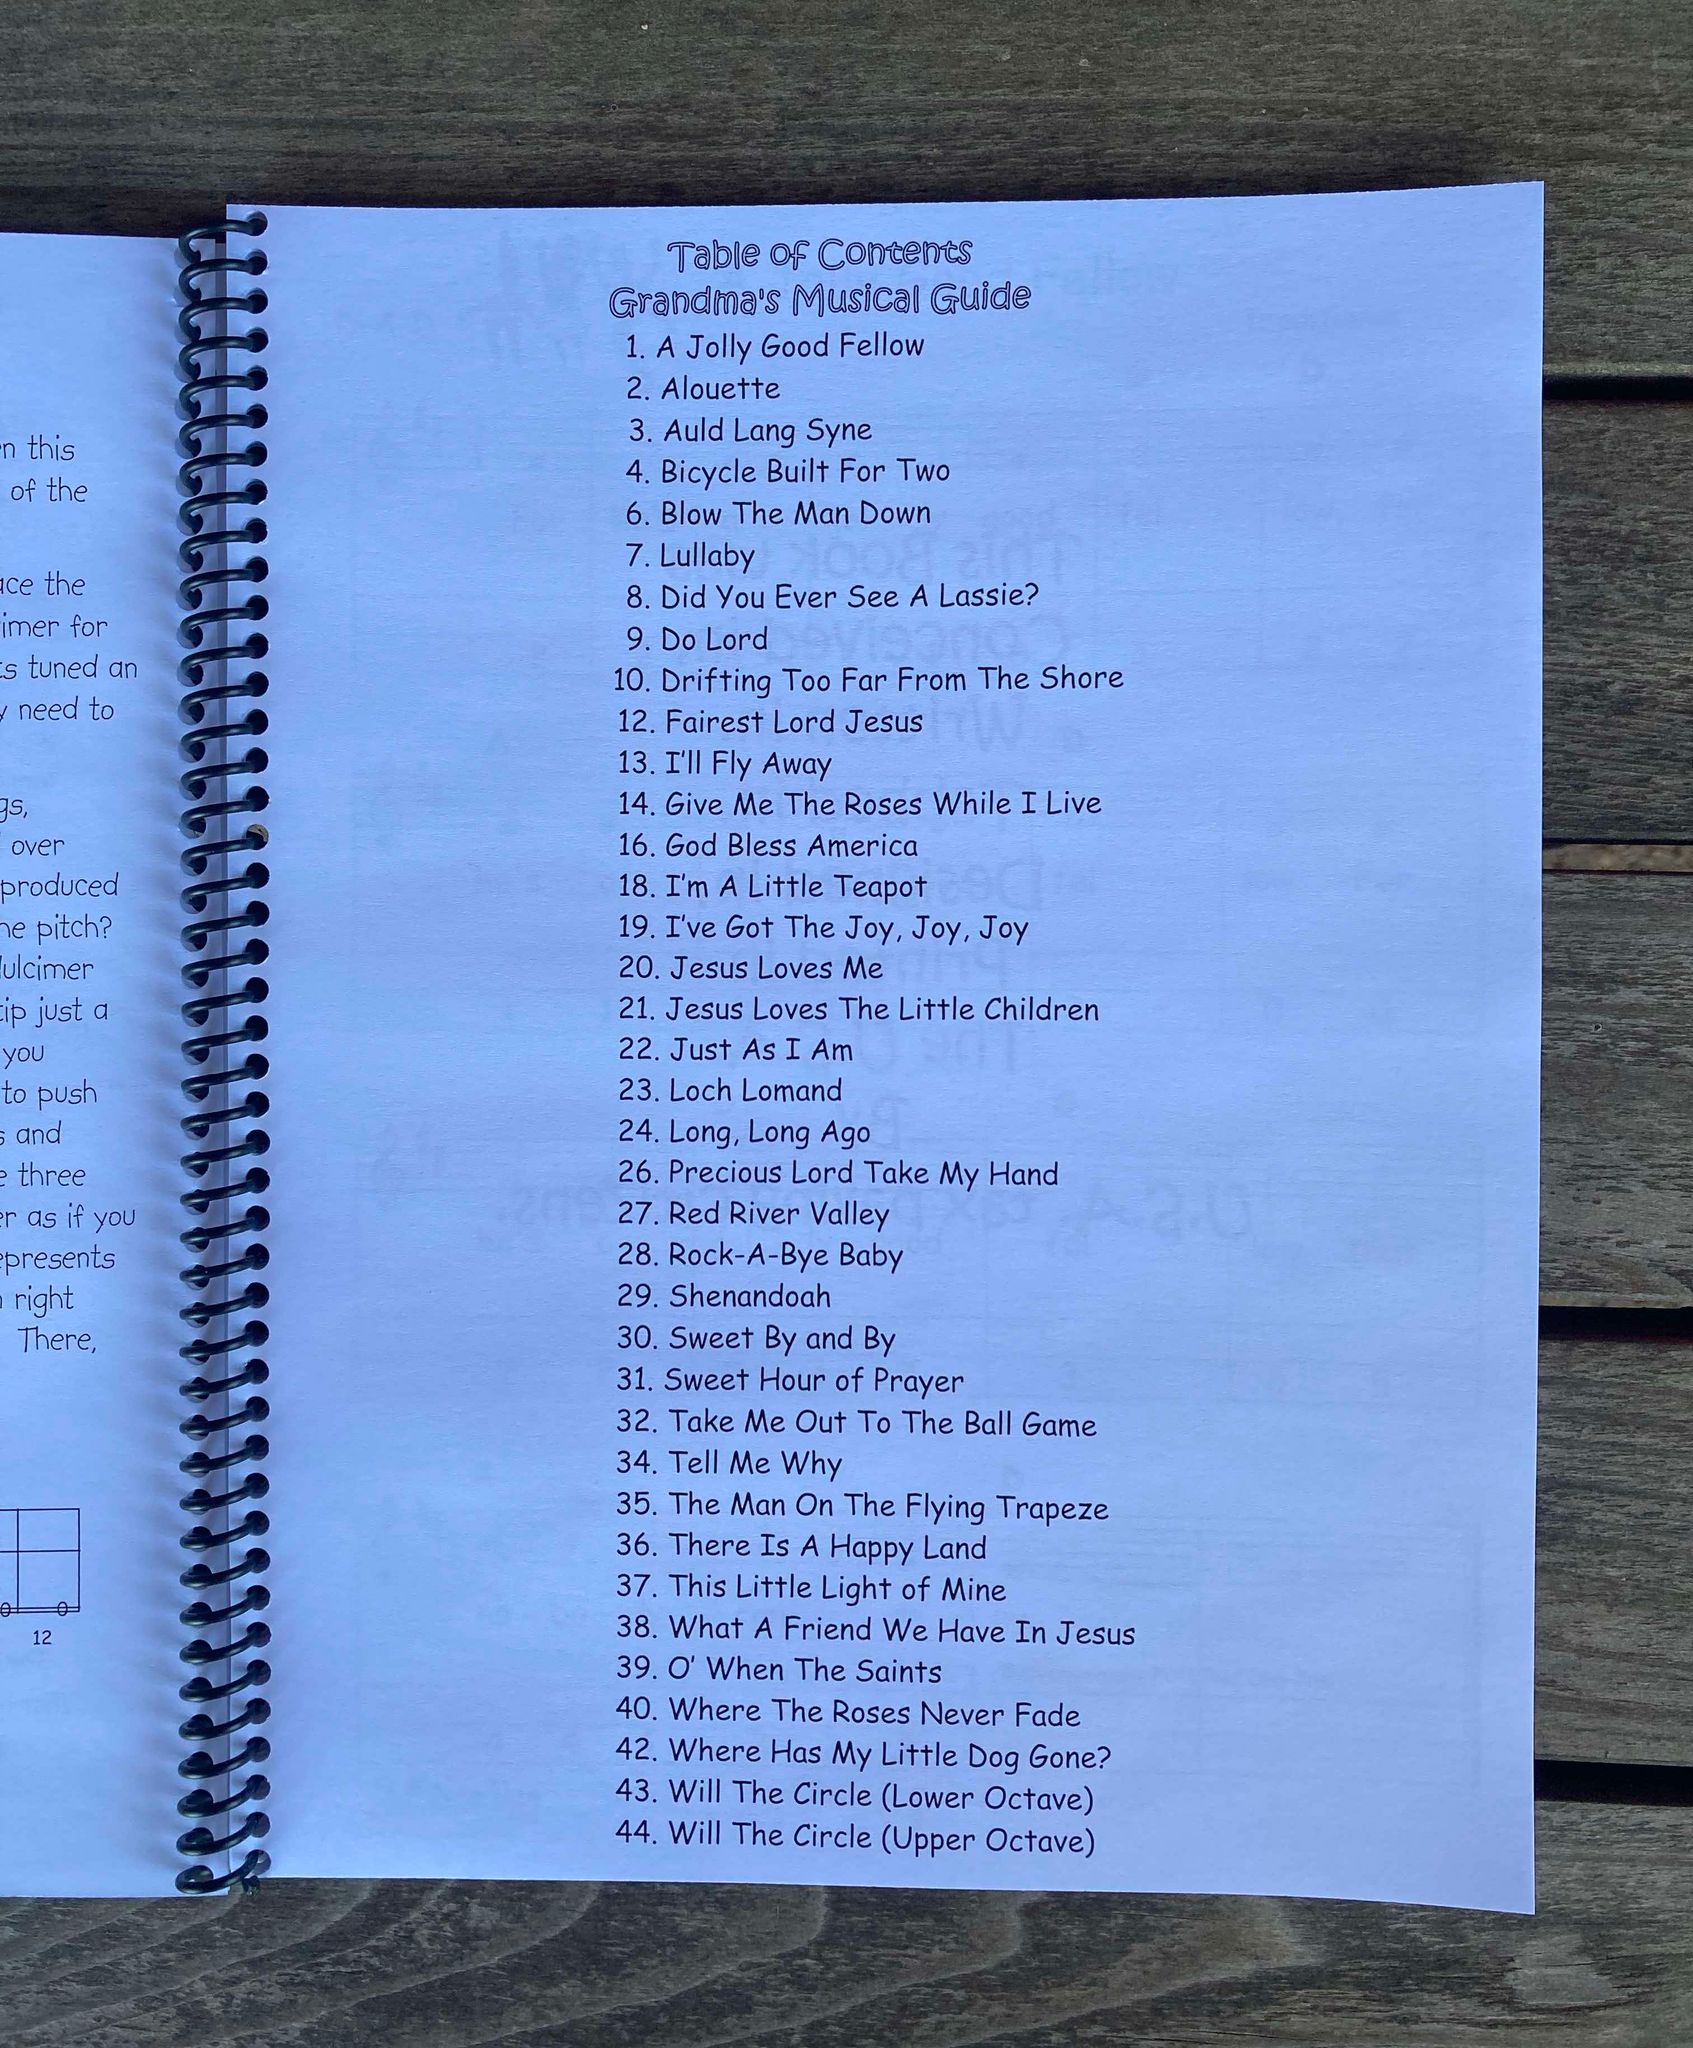 A spiral-bound booklet opened to a table of contents titled “Grandma's Musical Guide - by Red Dog Jam,” listing song titles such as "Bicycle Built for Two," "Give Me the Roses While I Live," and "Will the Circle Be Unbroken?". This beginner's book even includes Mountain Dulcimer Tab for D-A-D tuning.